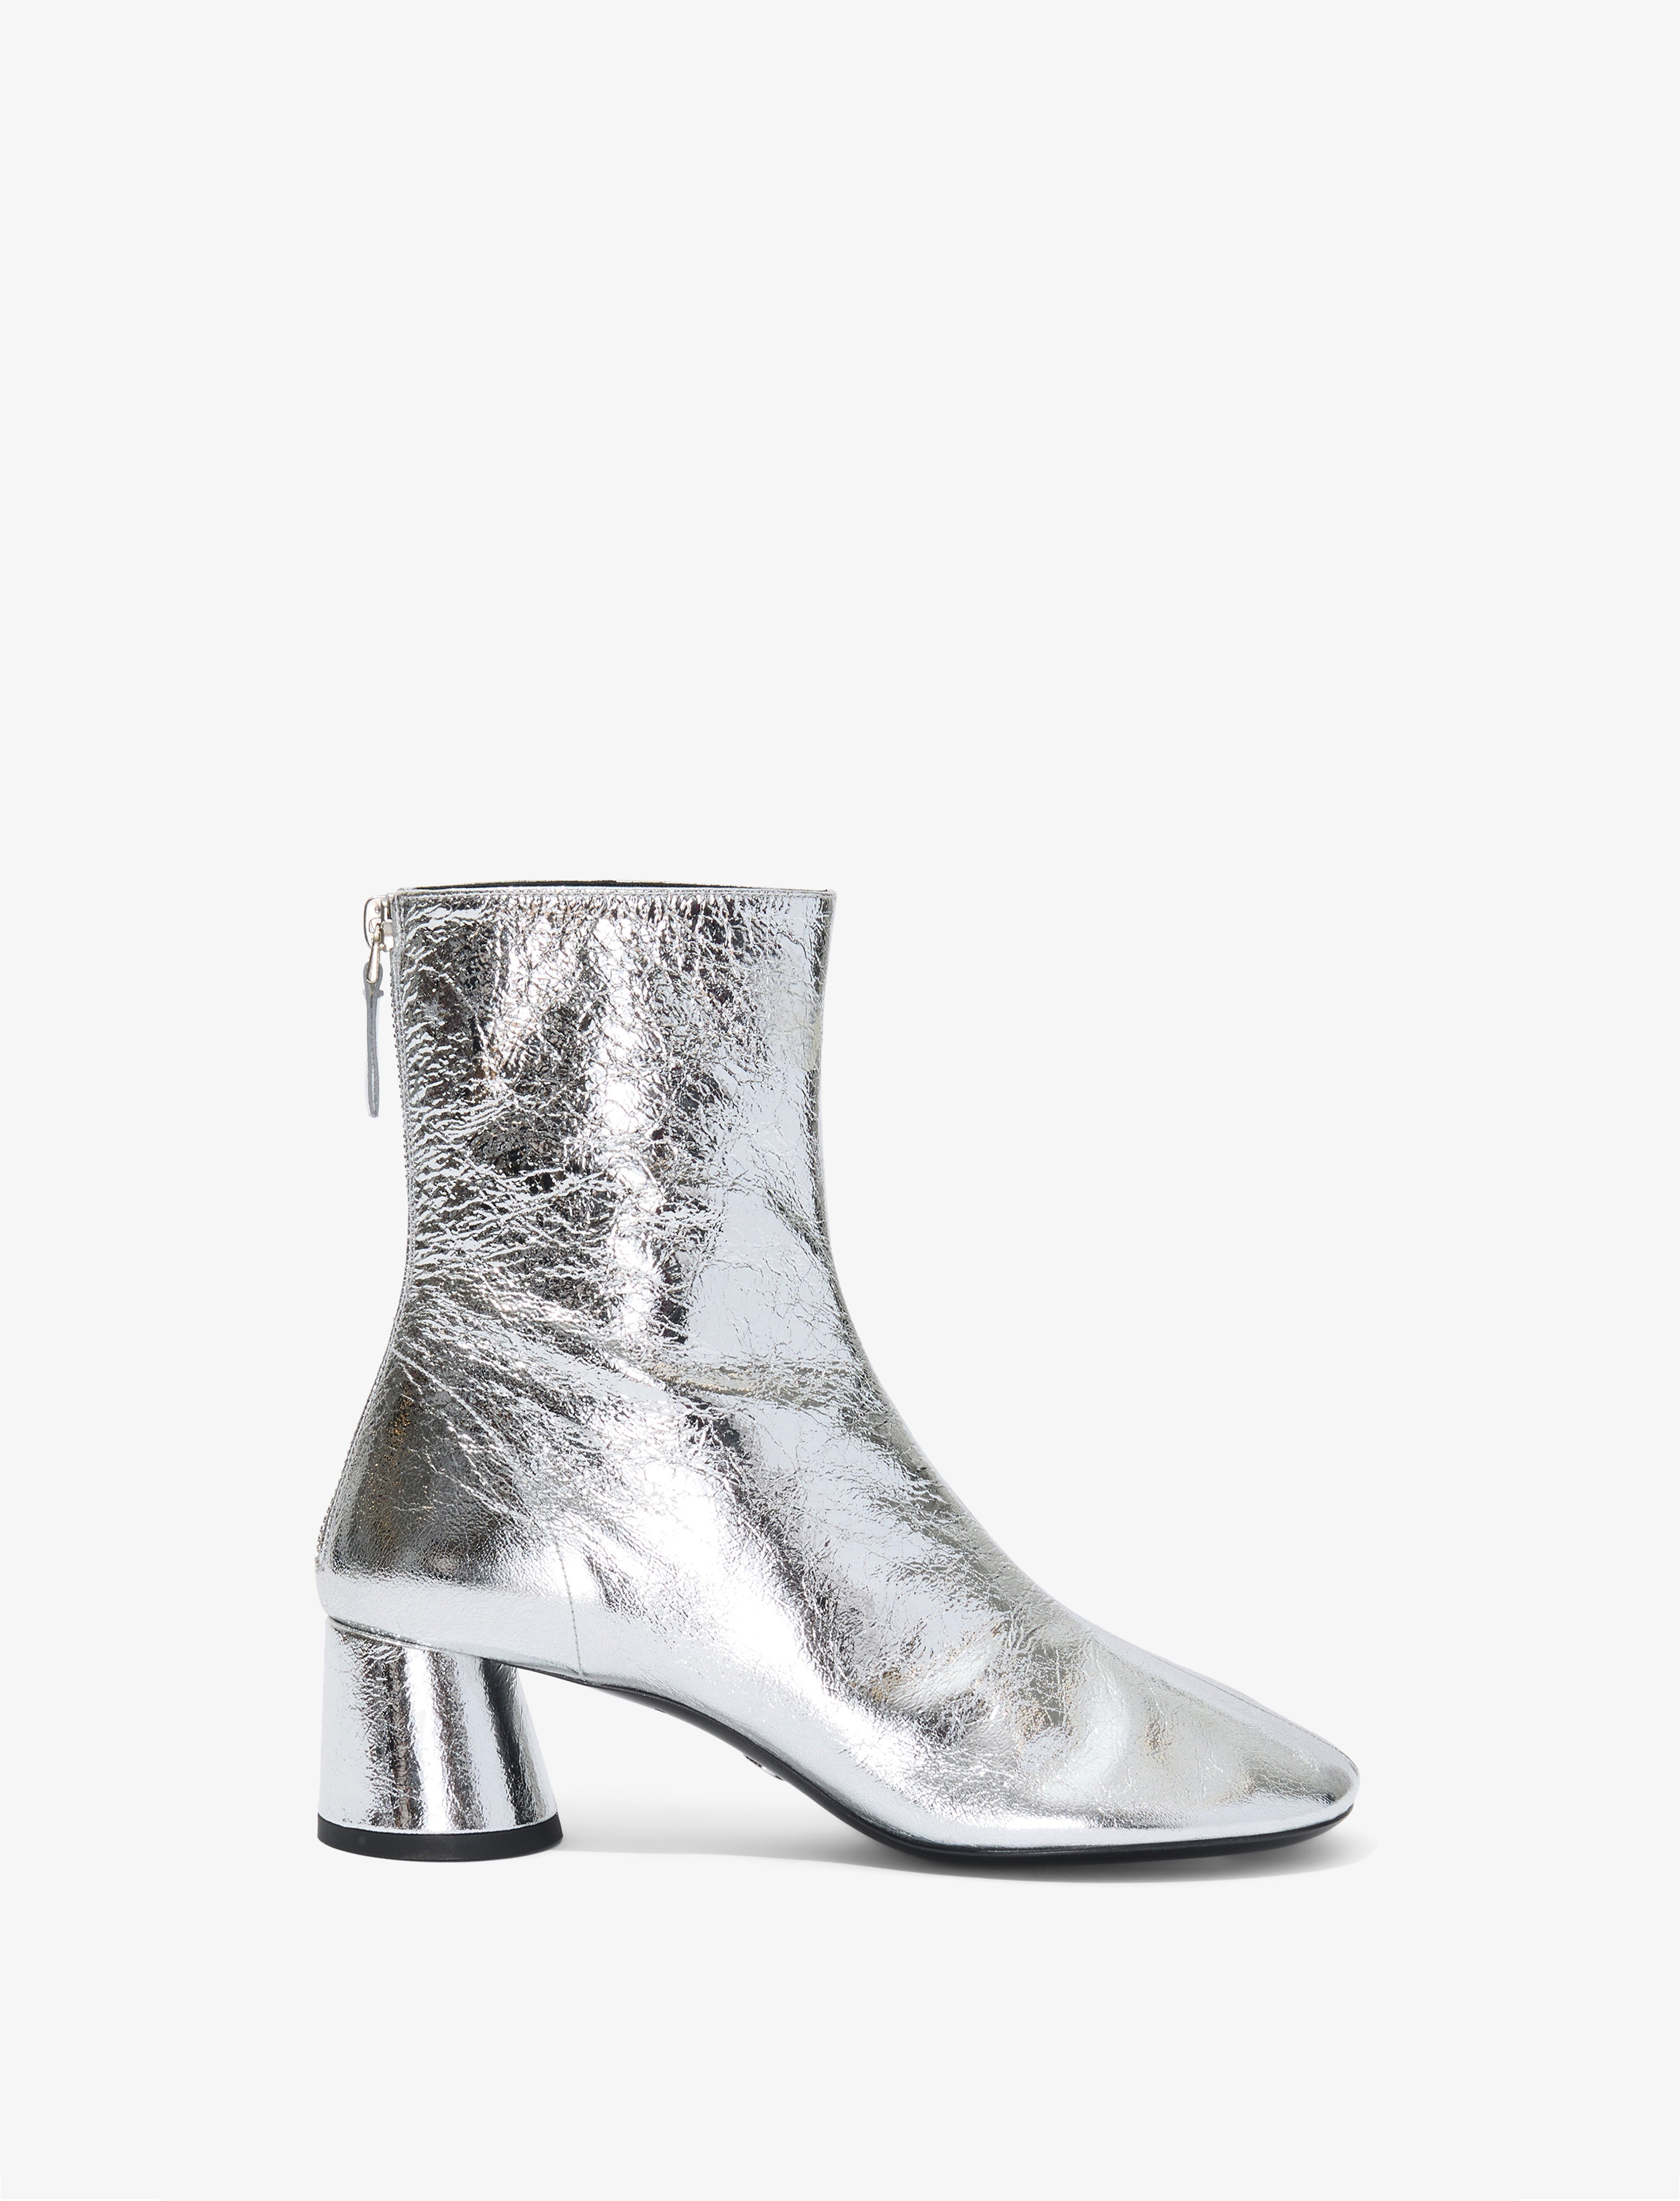 Glove Boots in Crinkled Metallic - 1